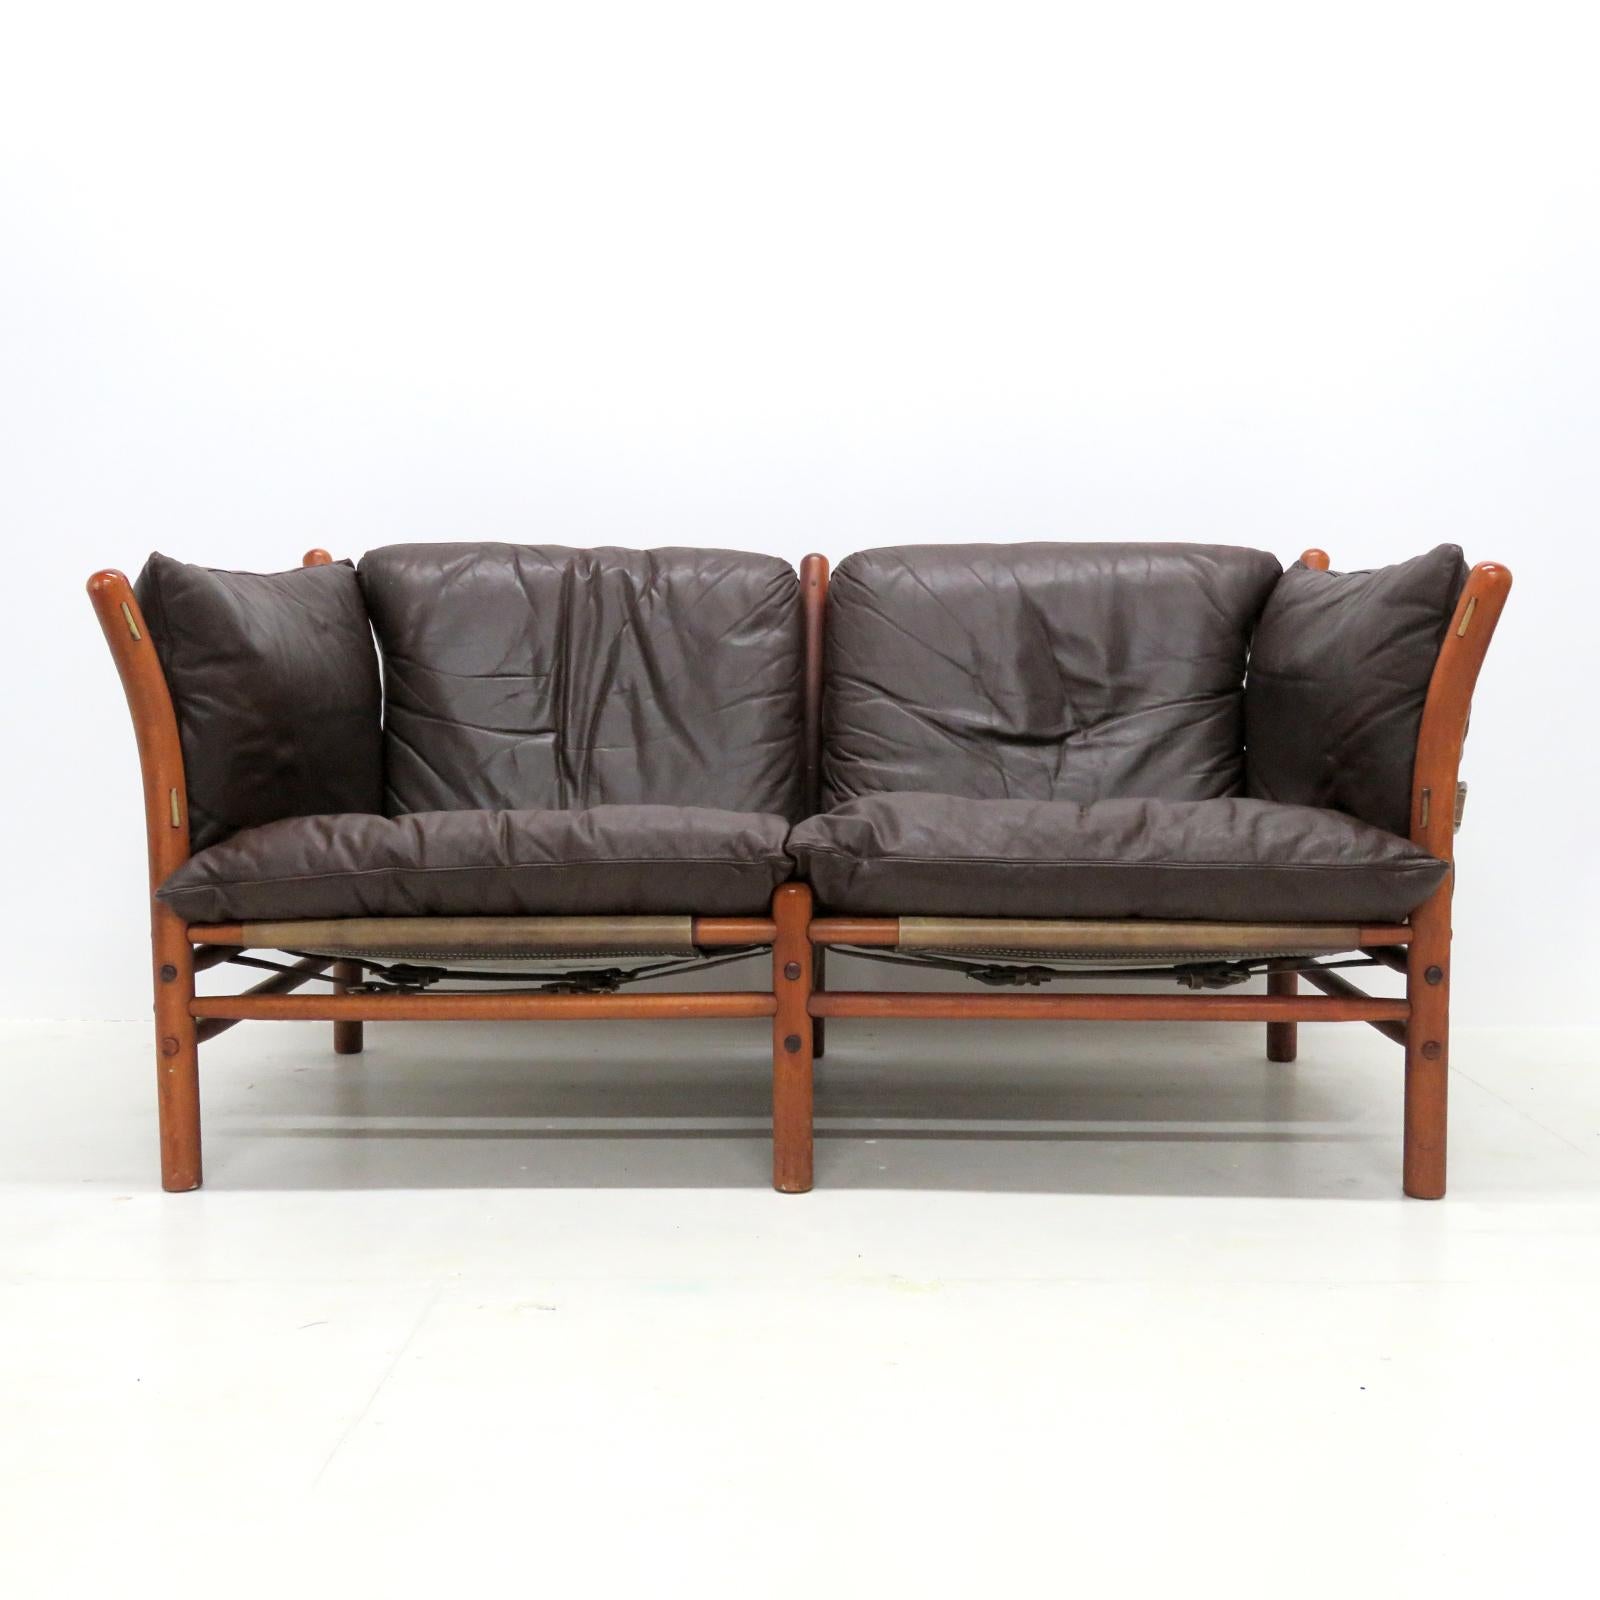 wonderful leather settee designed by Arne Norell in the early 1960s and produced by Aneby Møbler, Sweden, with thick, dark leather cushions on saddle leather sling supports with brass hardware, the frame is made of sturdy, solid, dark stained beech,